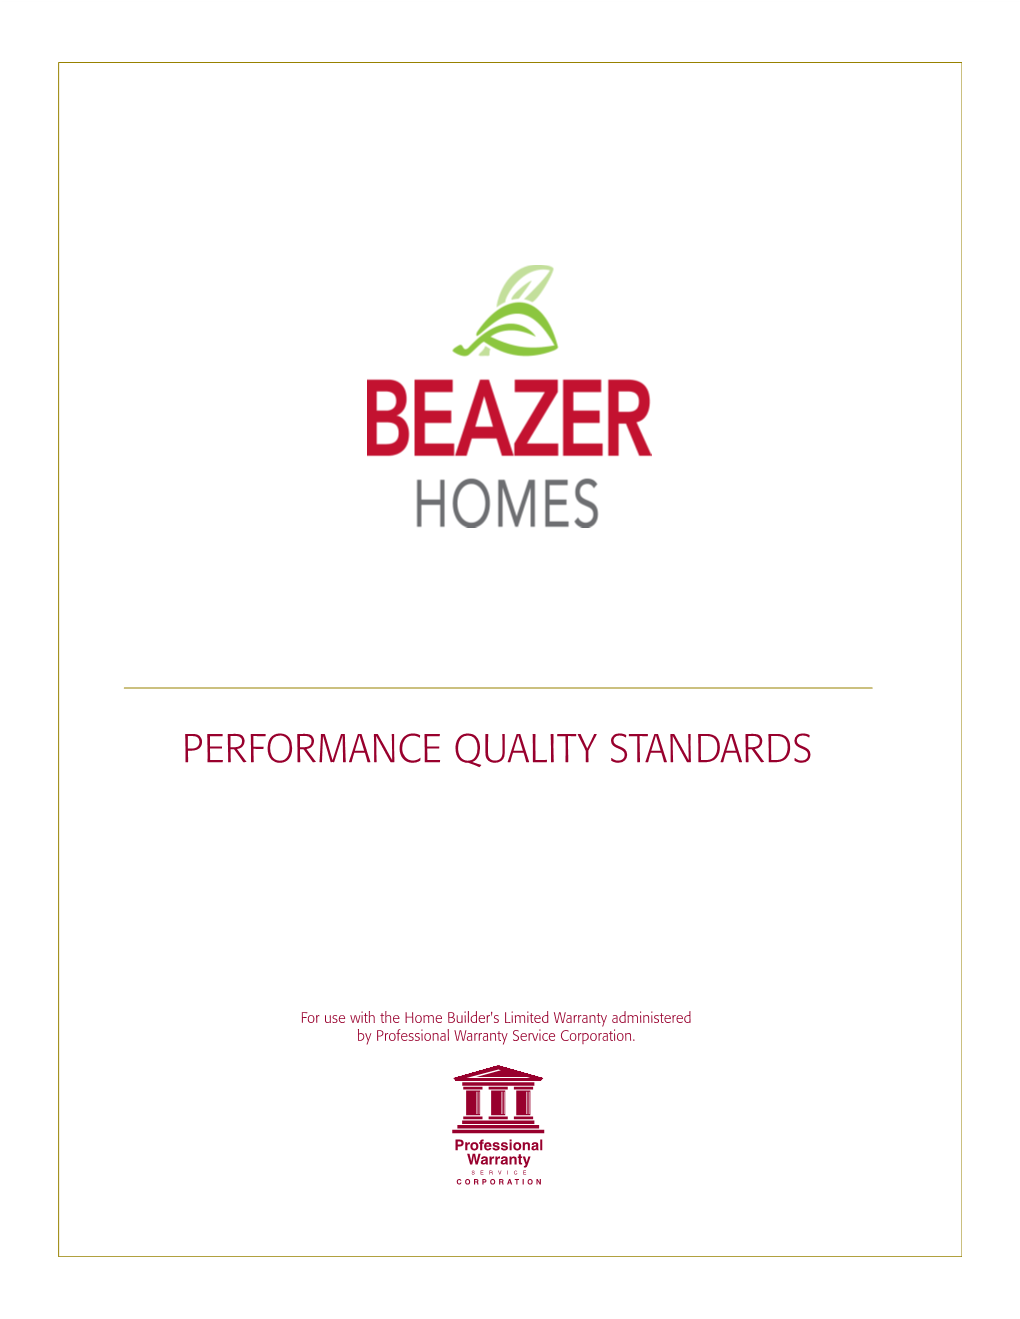 Performance Quality Standards